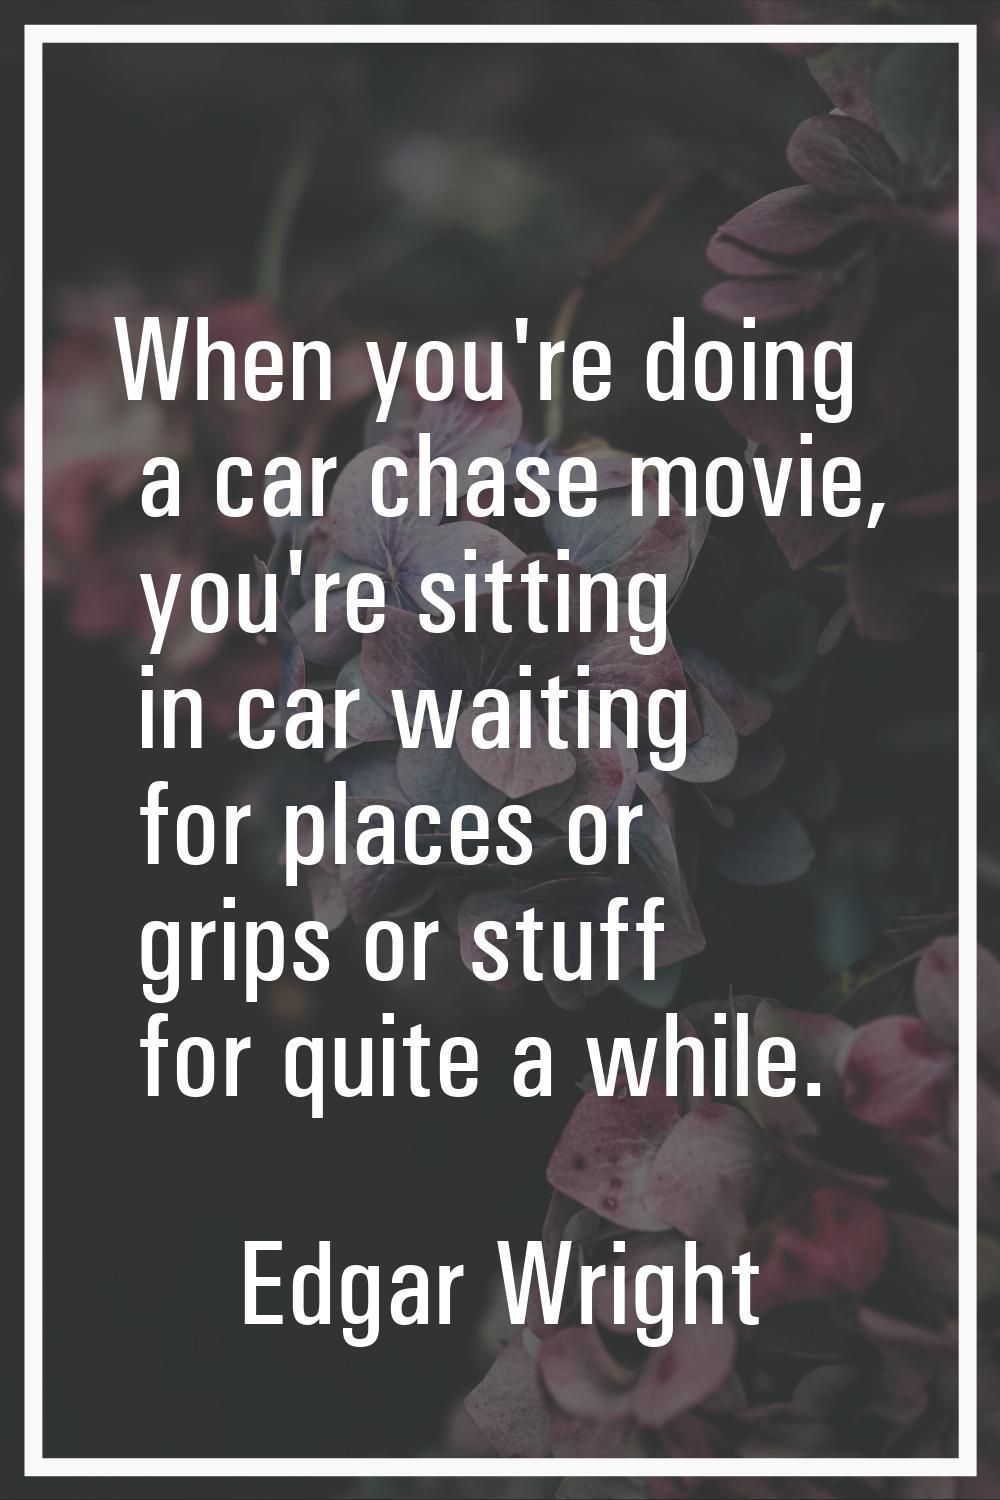 When you're doing a car chase movie, you're sitting in car waiting for places or grips or stuff for